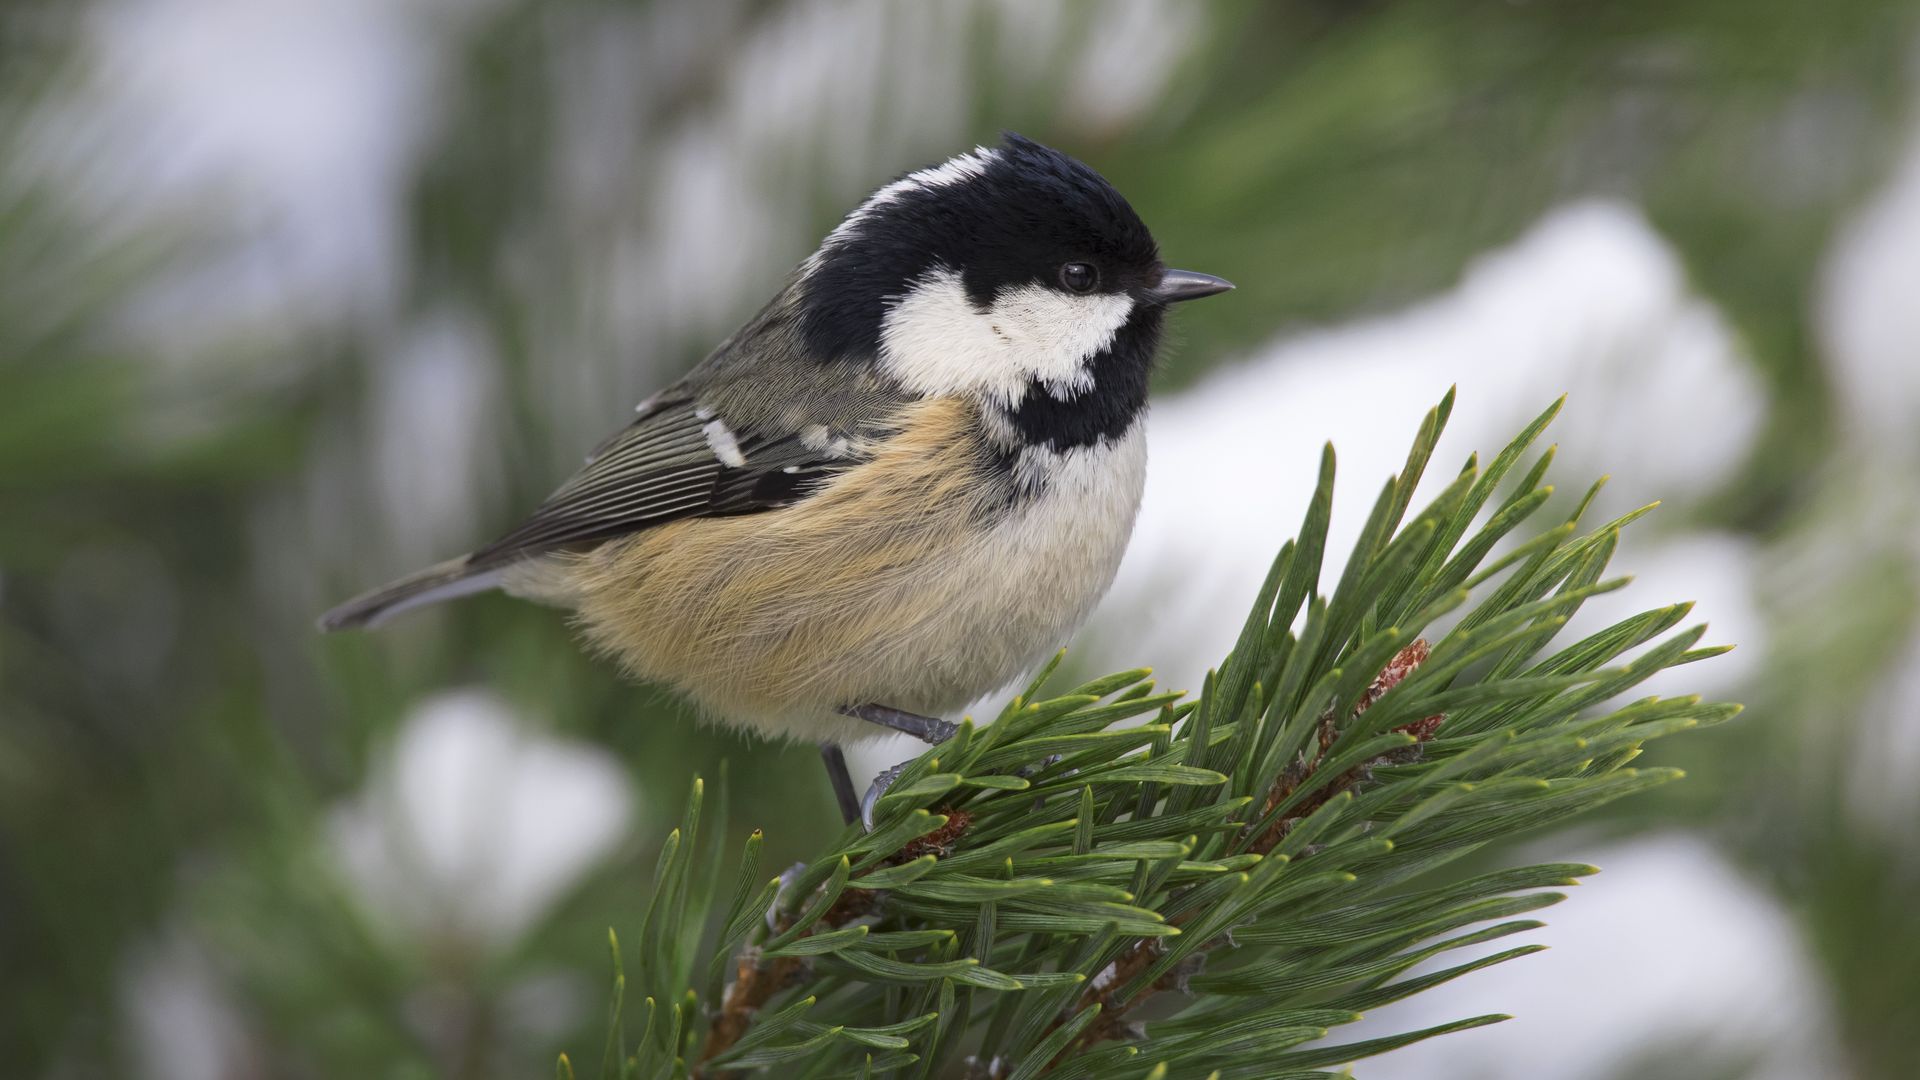 A chickadee perches on a pine tree branch